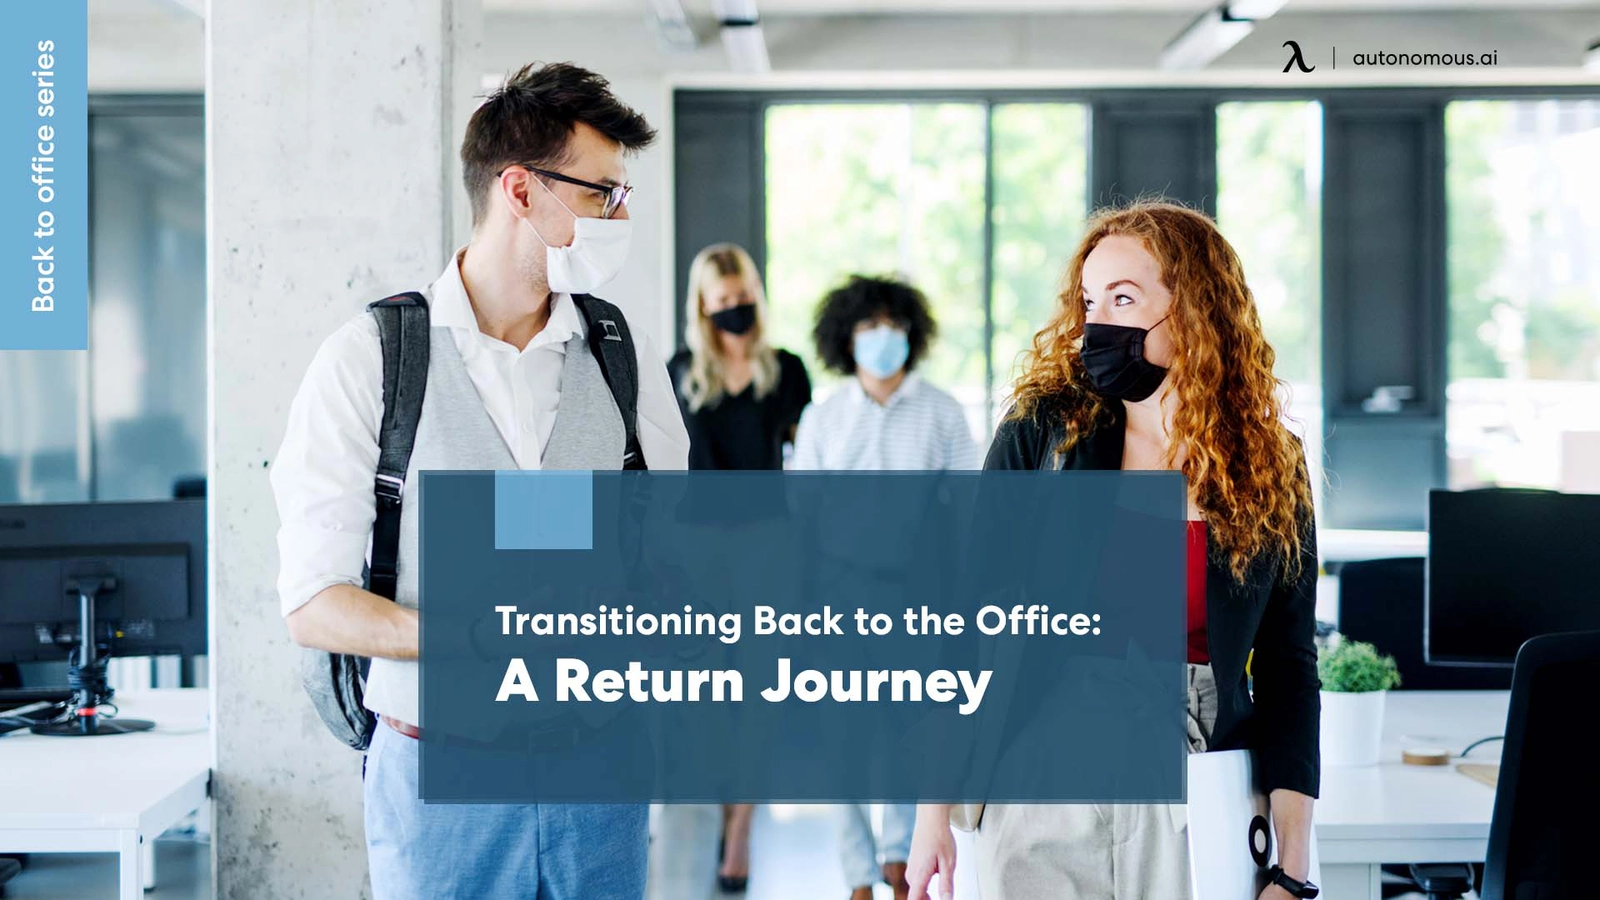 Transitioning Back to the Office: A Return Journey